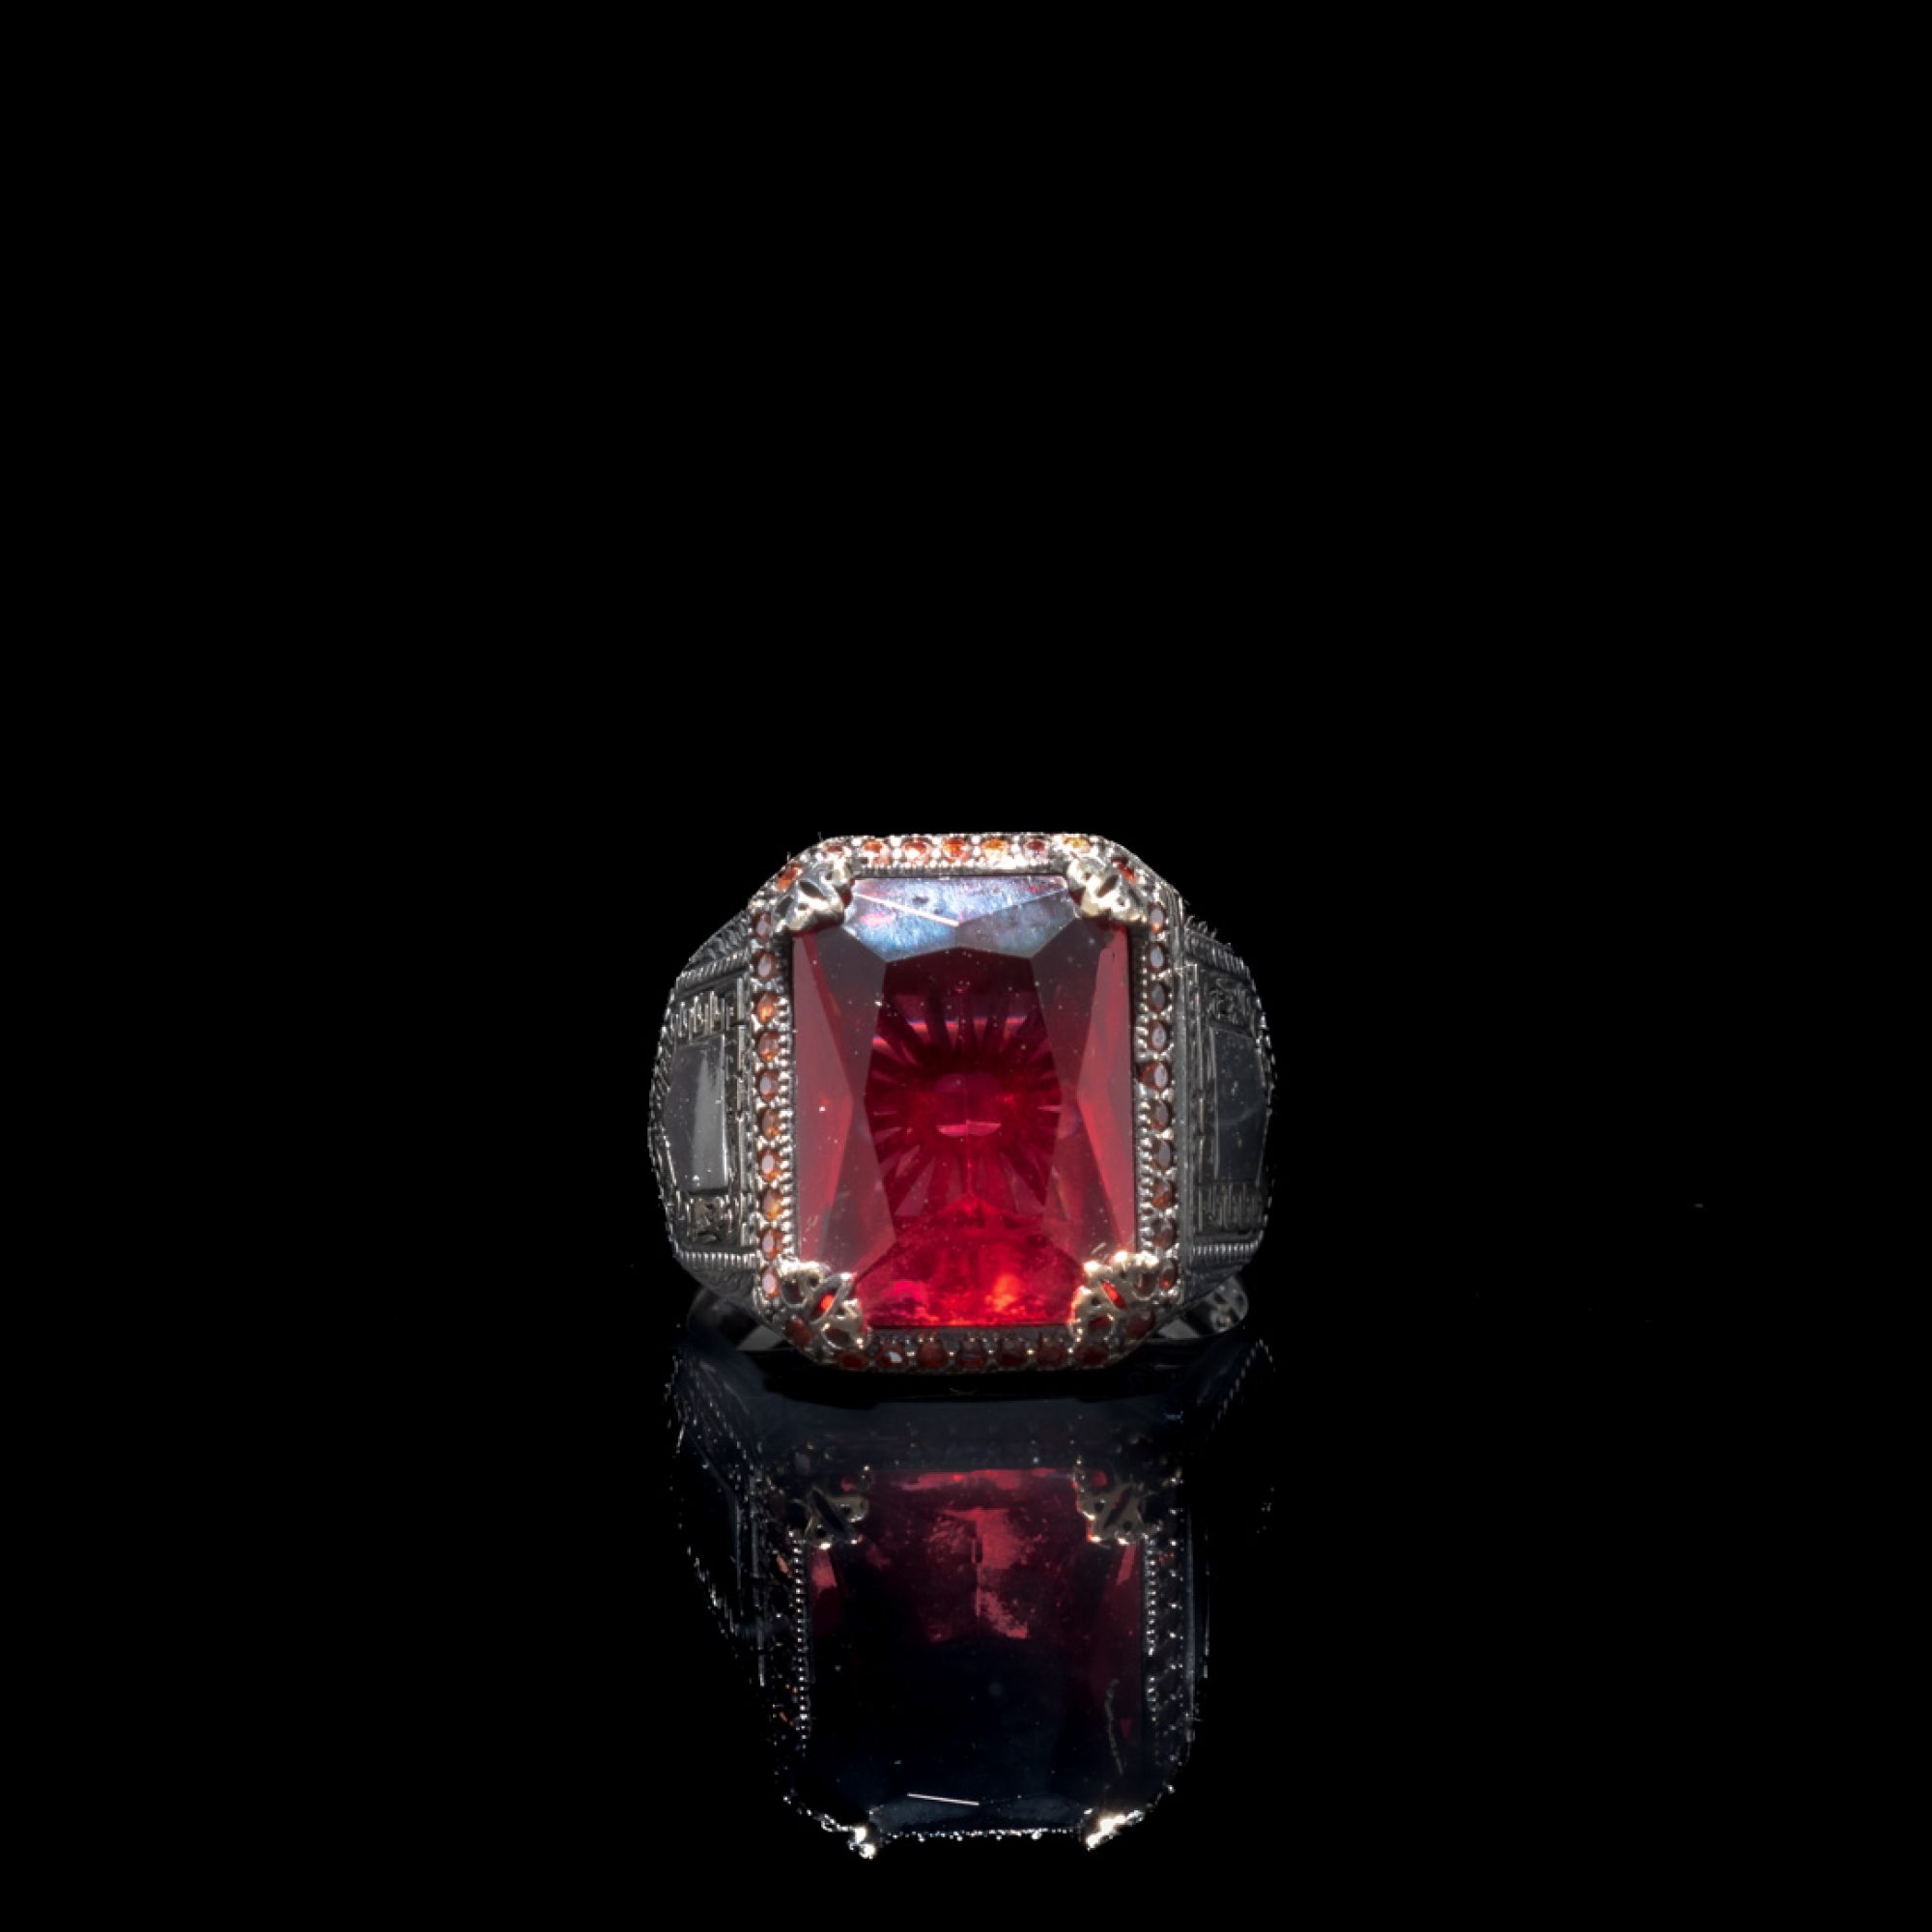 Silver ring with garnet stone